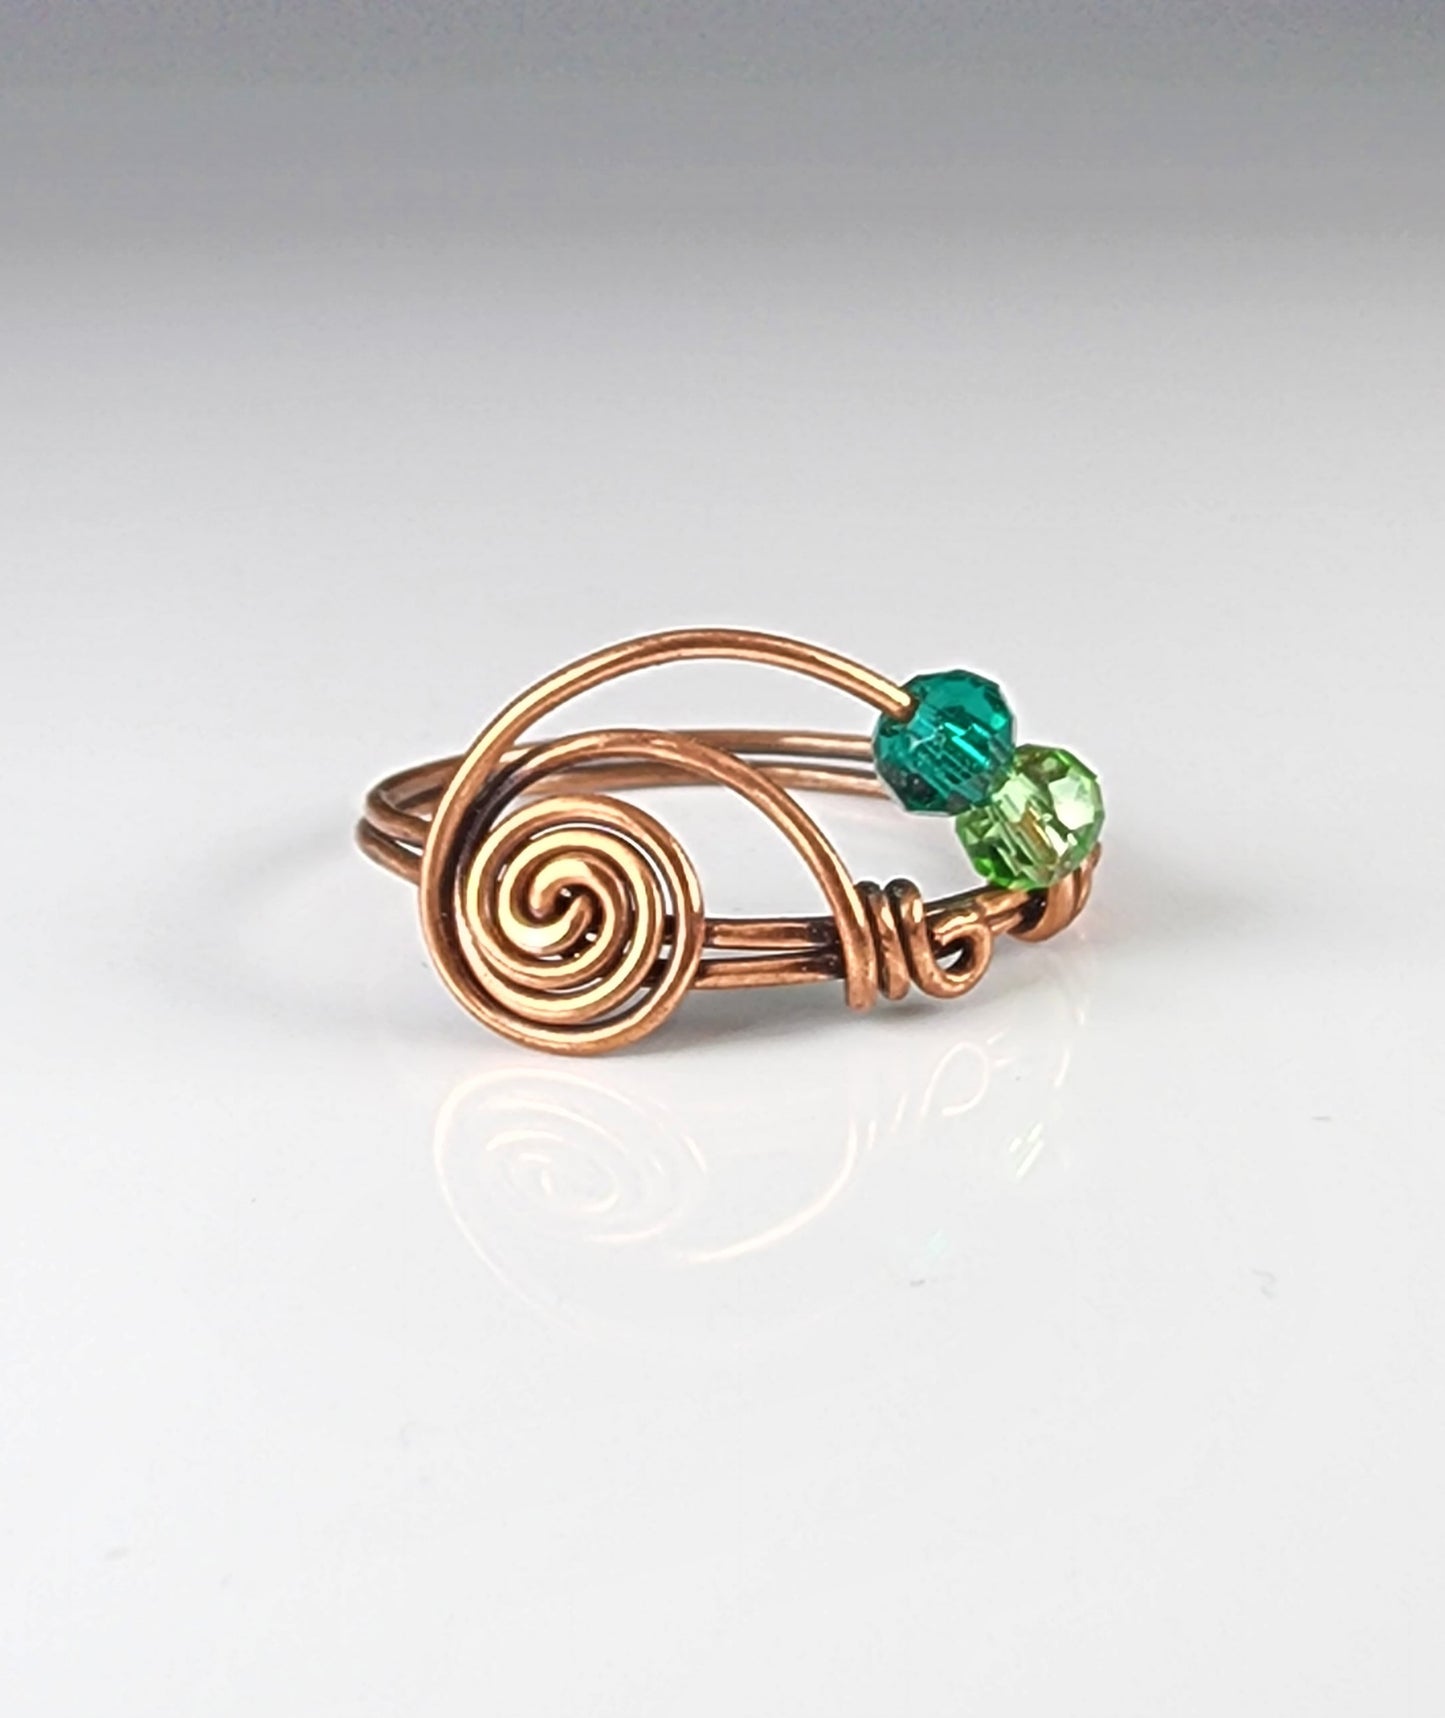 Fidget Copper Ring with Green Beads